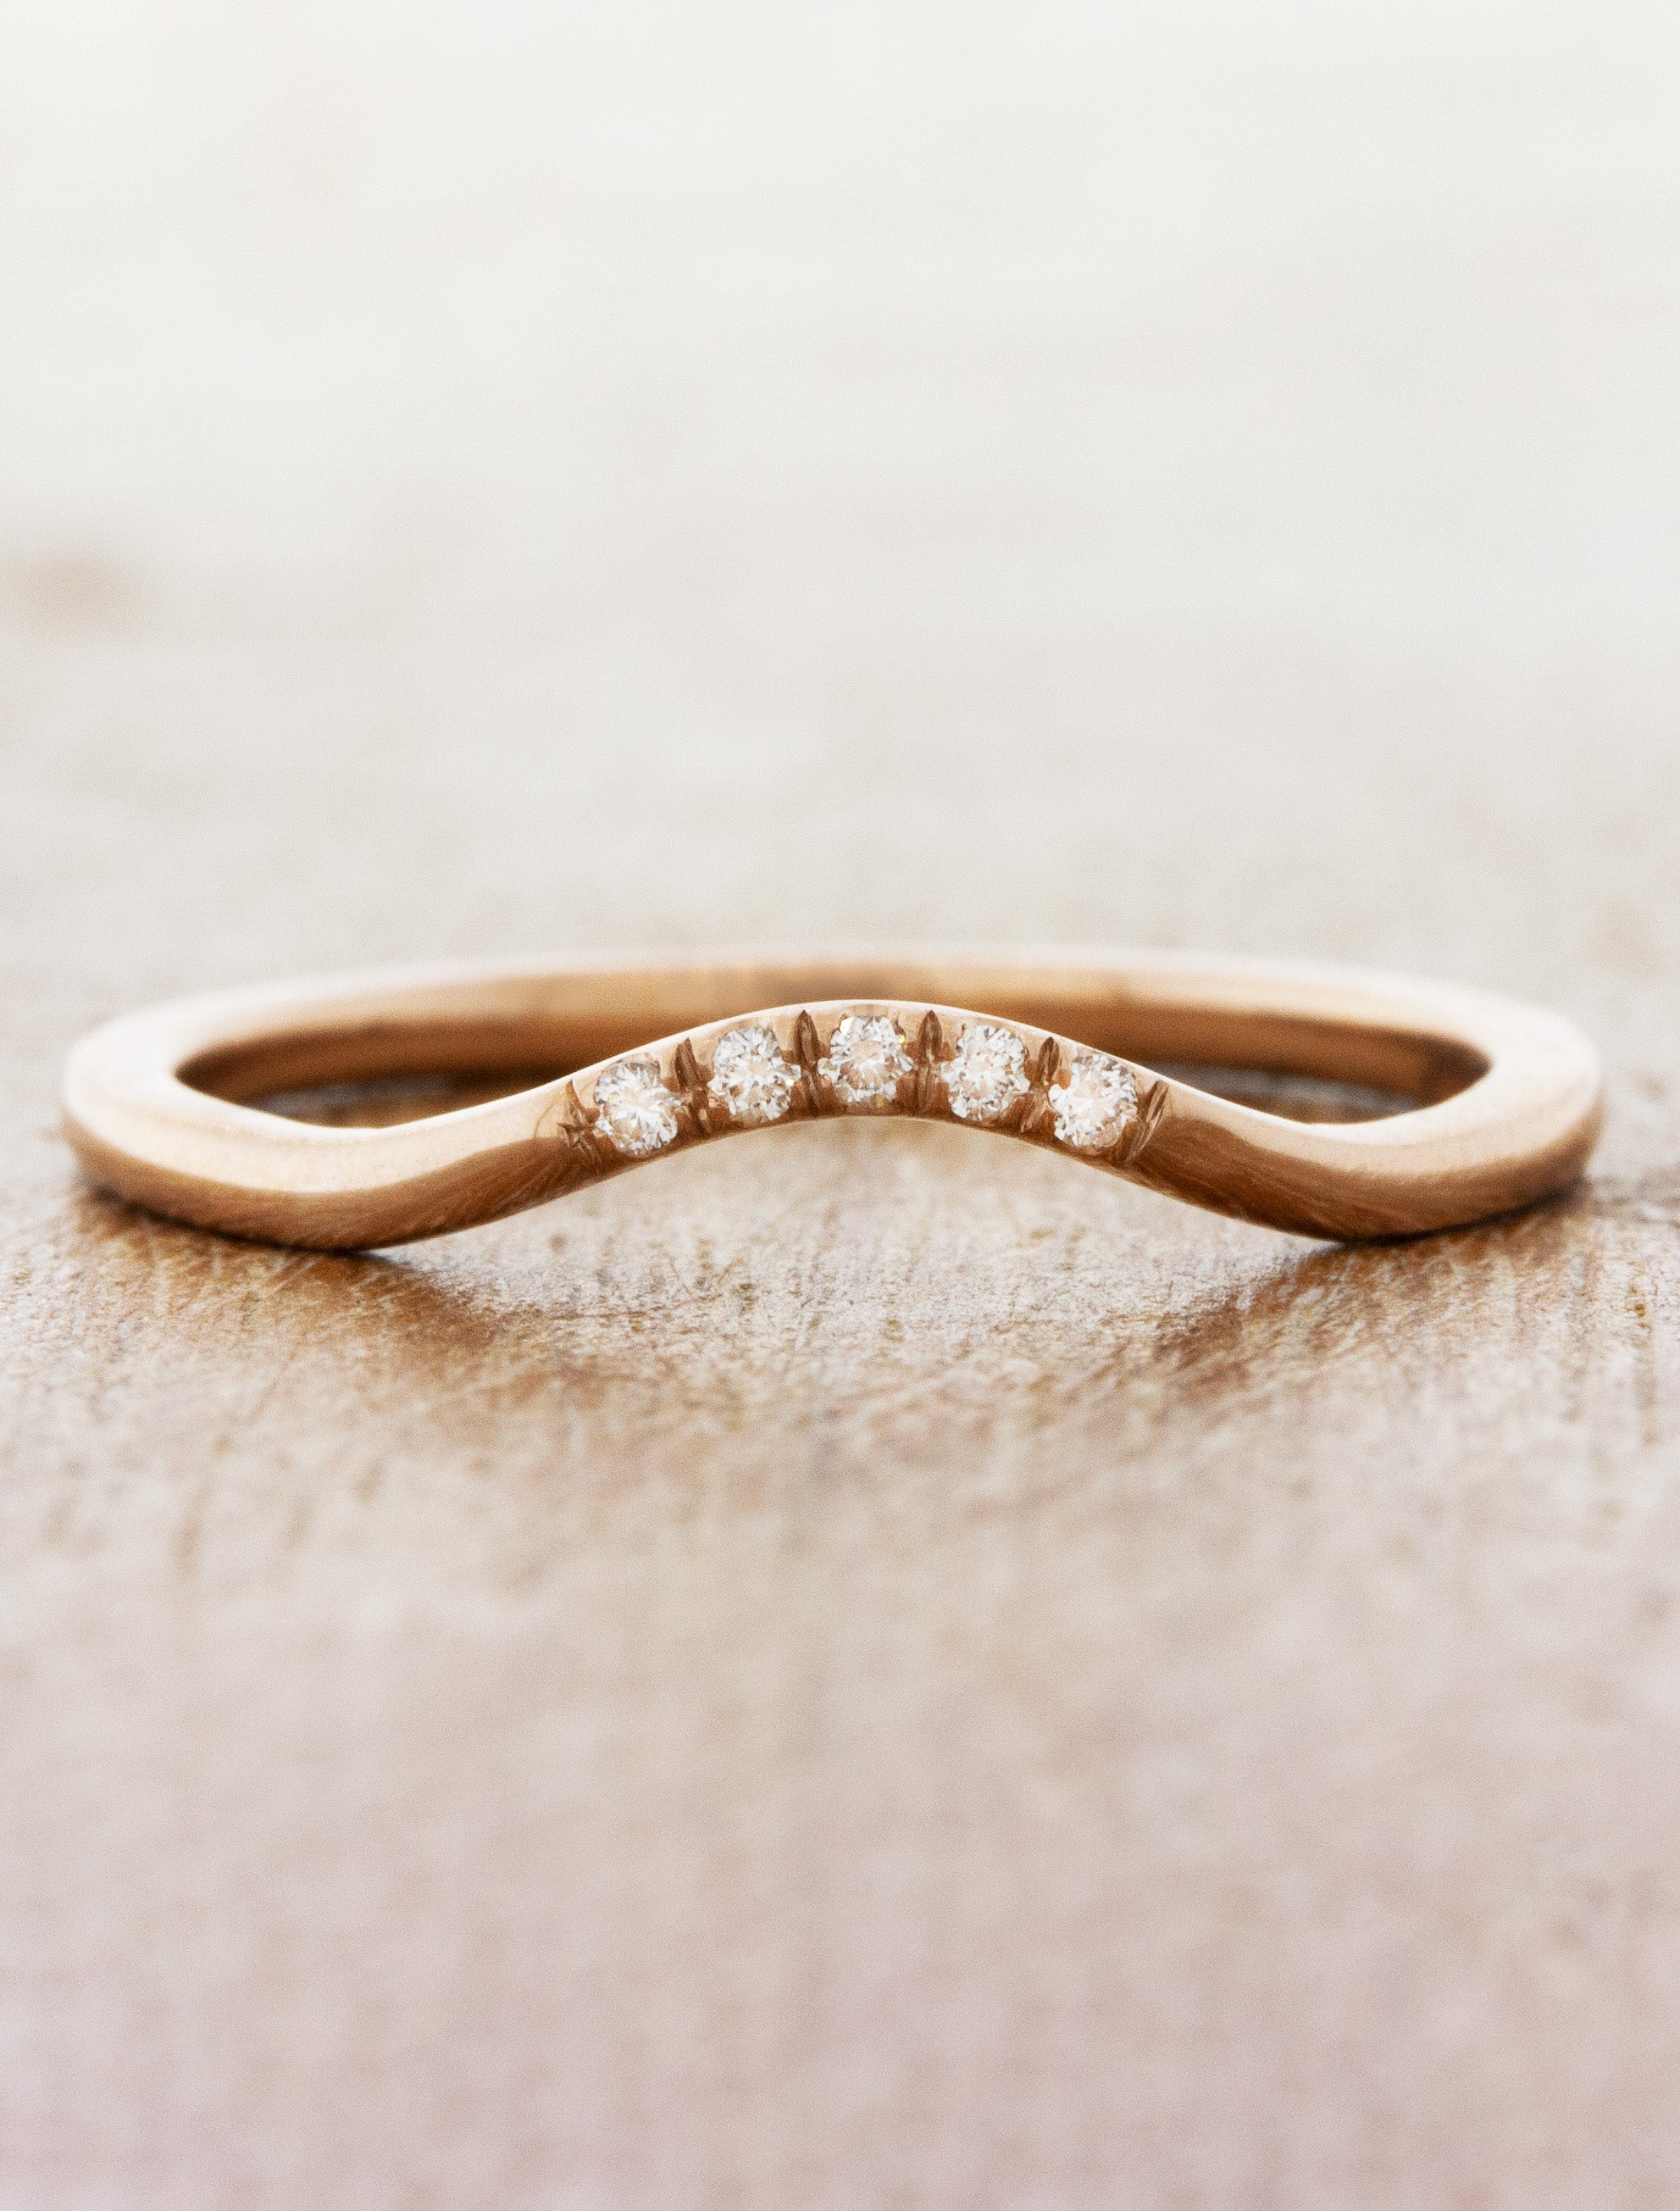 Design Diamonds with Band Curved Wedding Dana & Ken Rose | Gold Amorie: